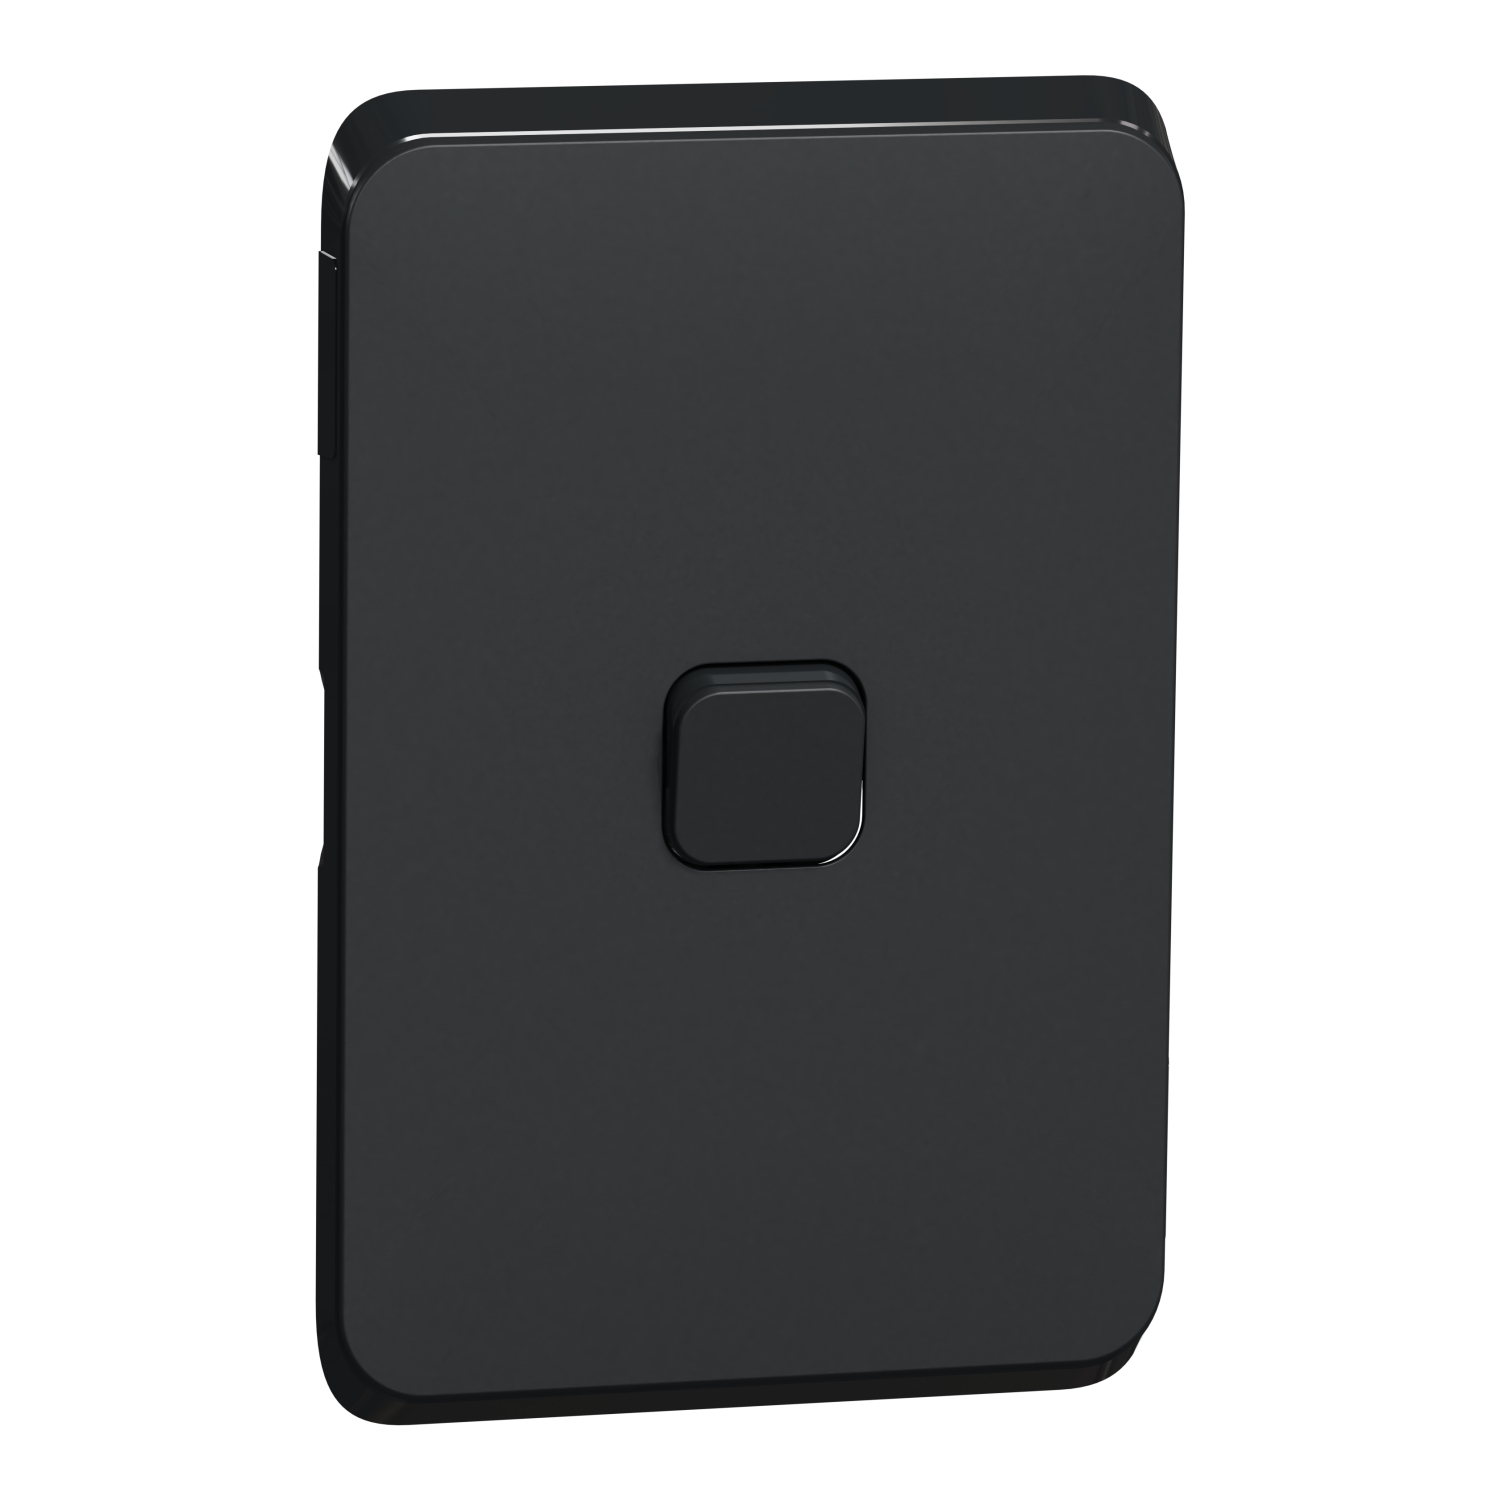 PDL Iconic - Cover Plate Switch 1-Gang - Solid Black